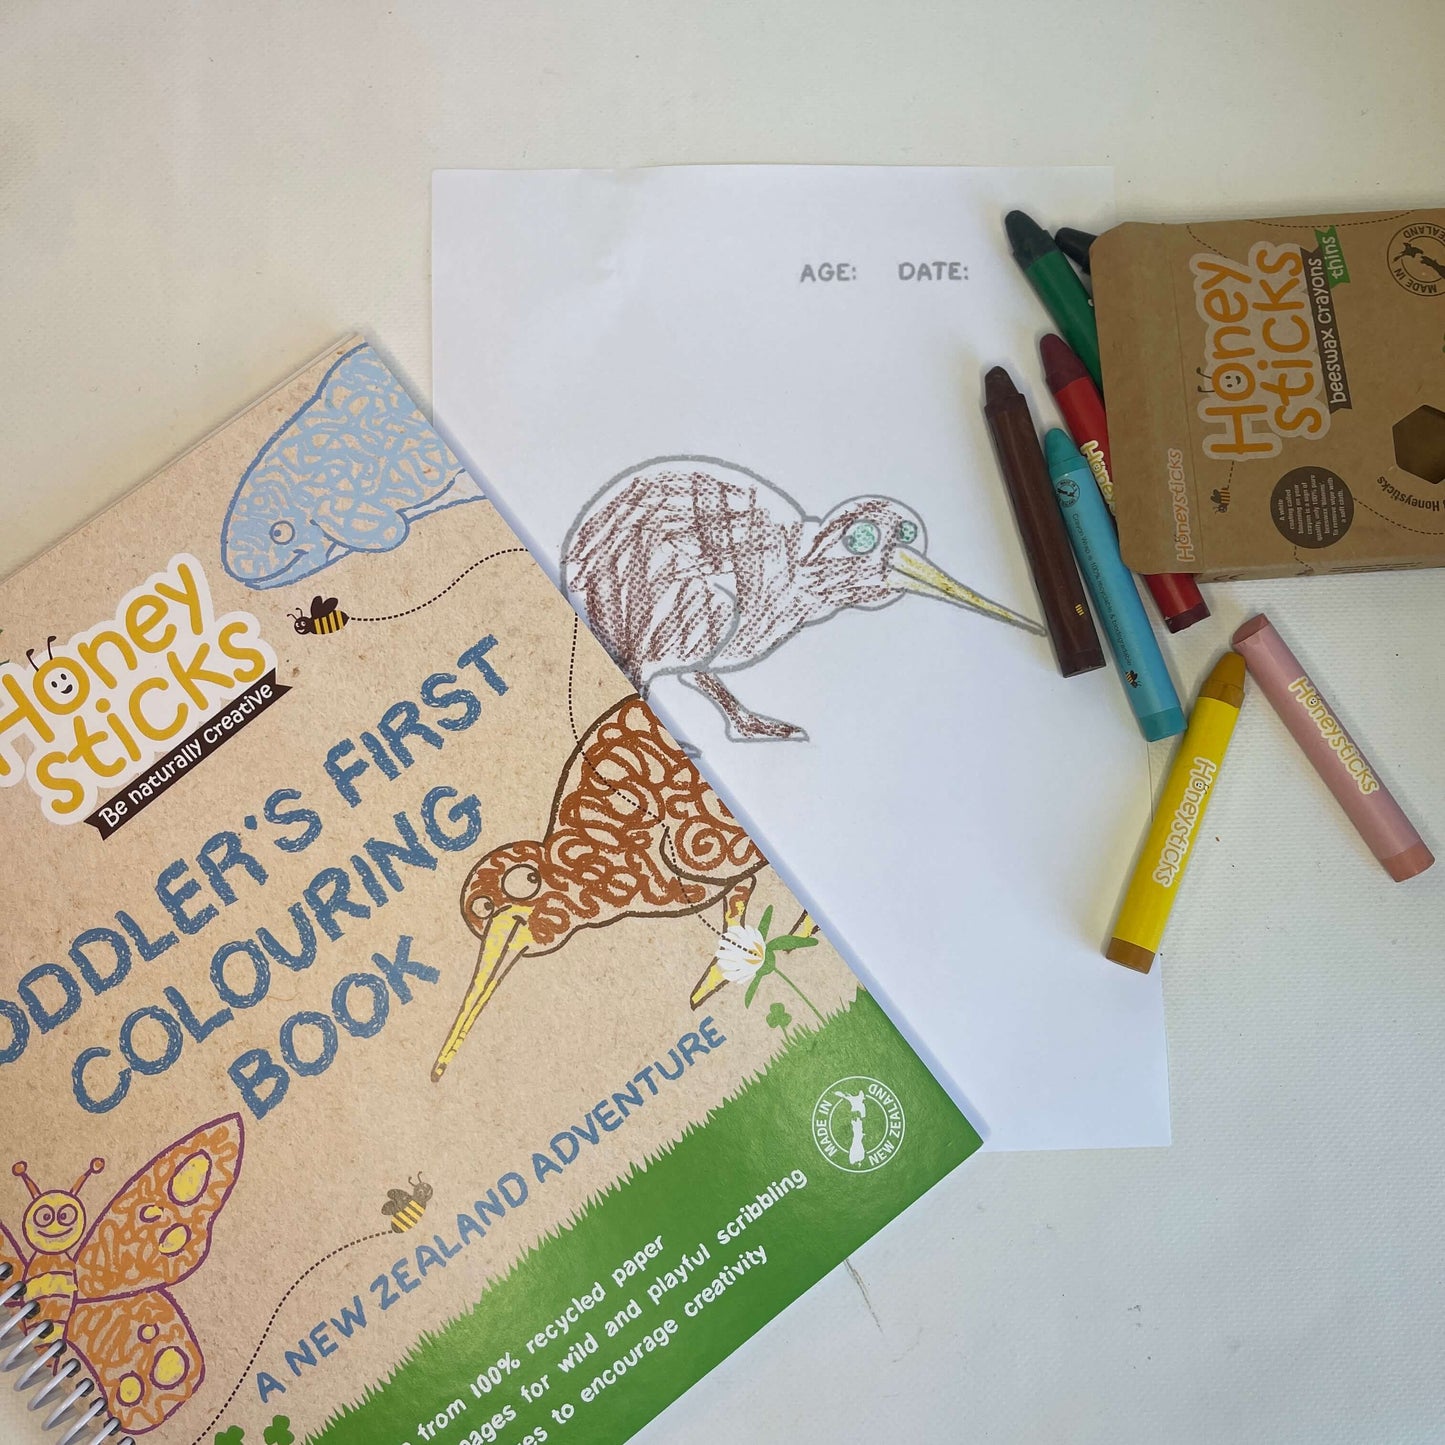 Toddler colouring book in a New Zealand theme with crayons.